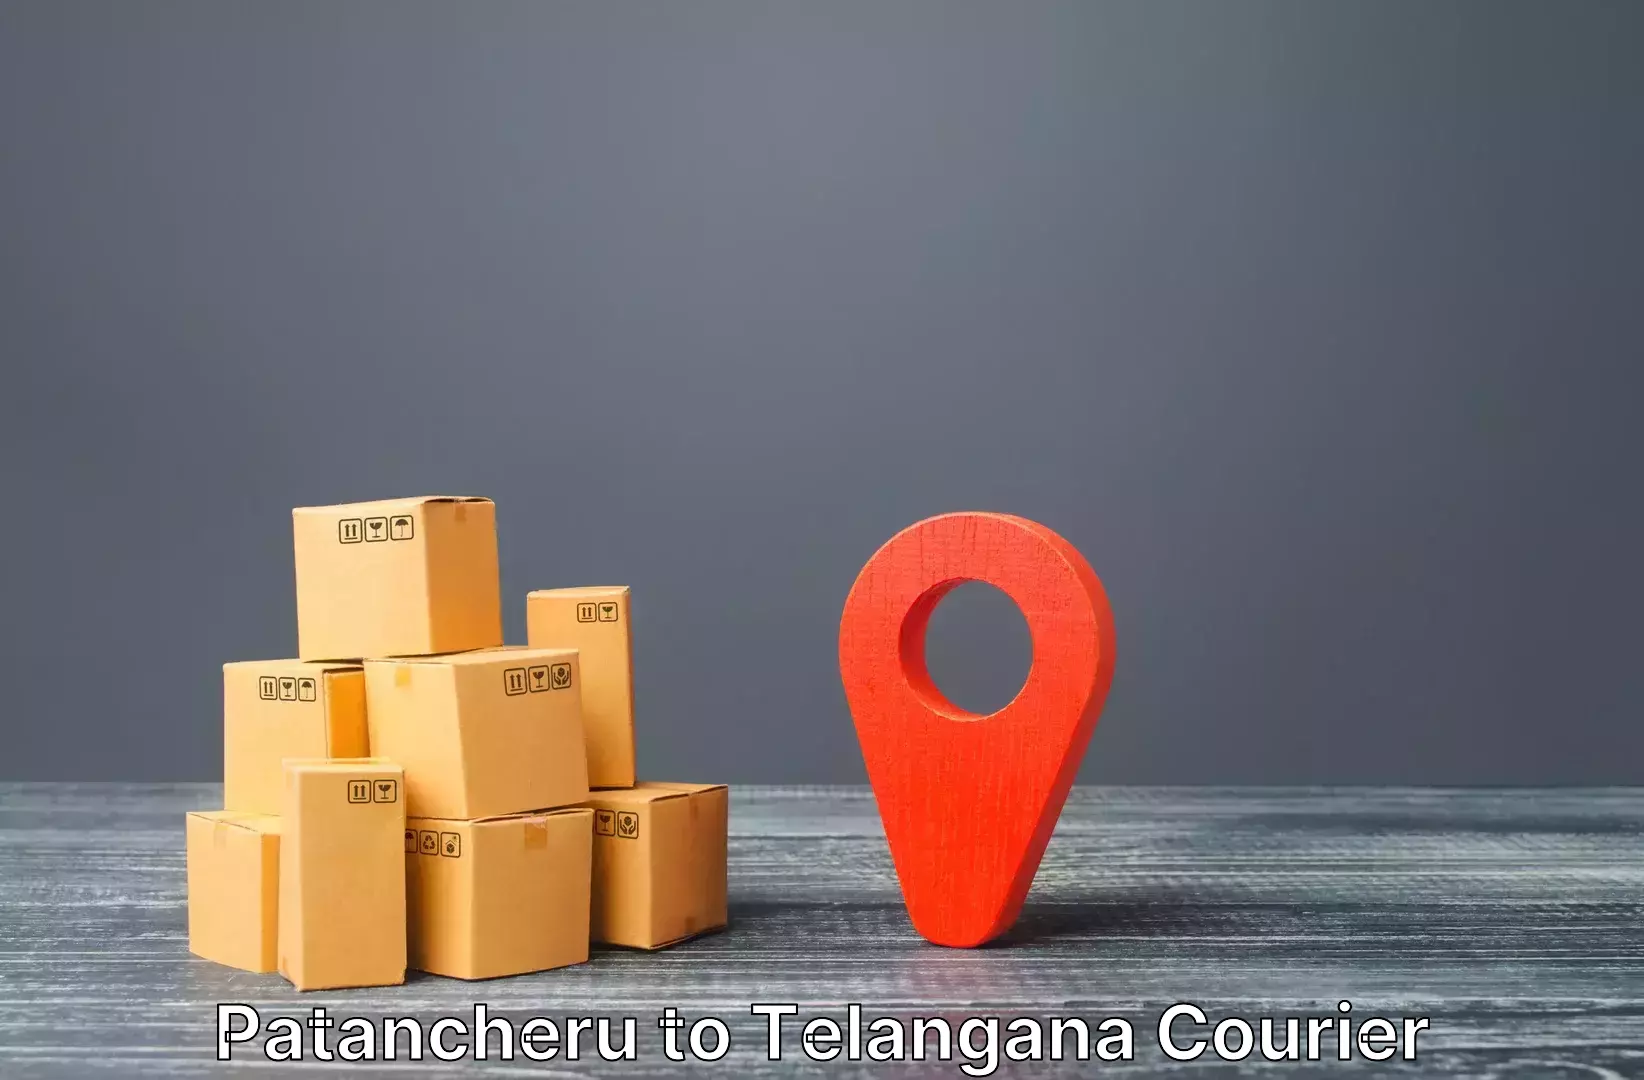 Luggage delivery system in Patancheru to Telangana